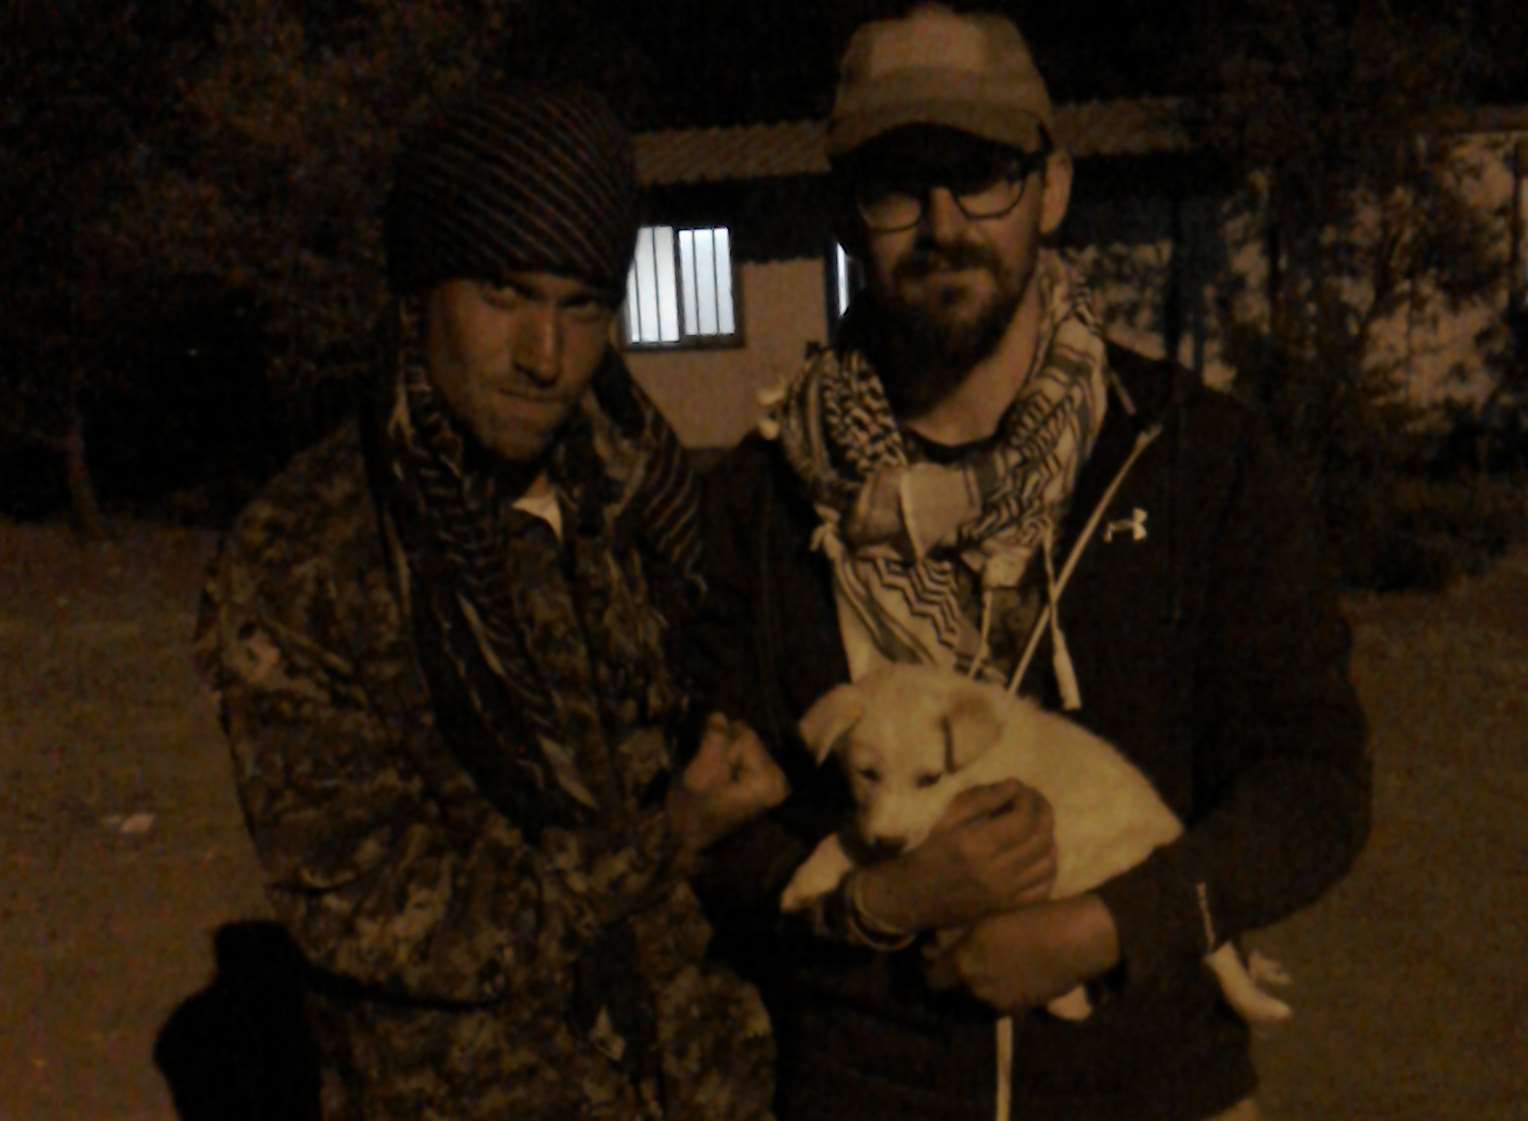 Mr Harrison spent two months with YPG forces fighting Isis militants. Picture: bijikurdistan.tumblr.com